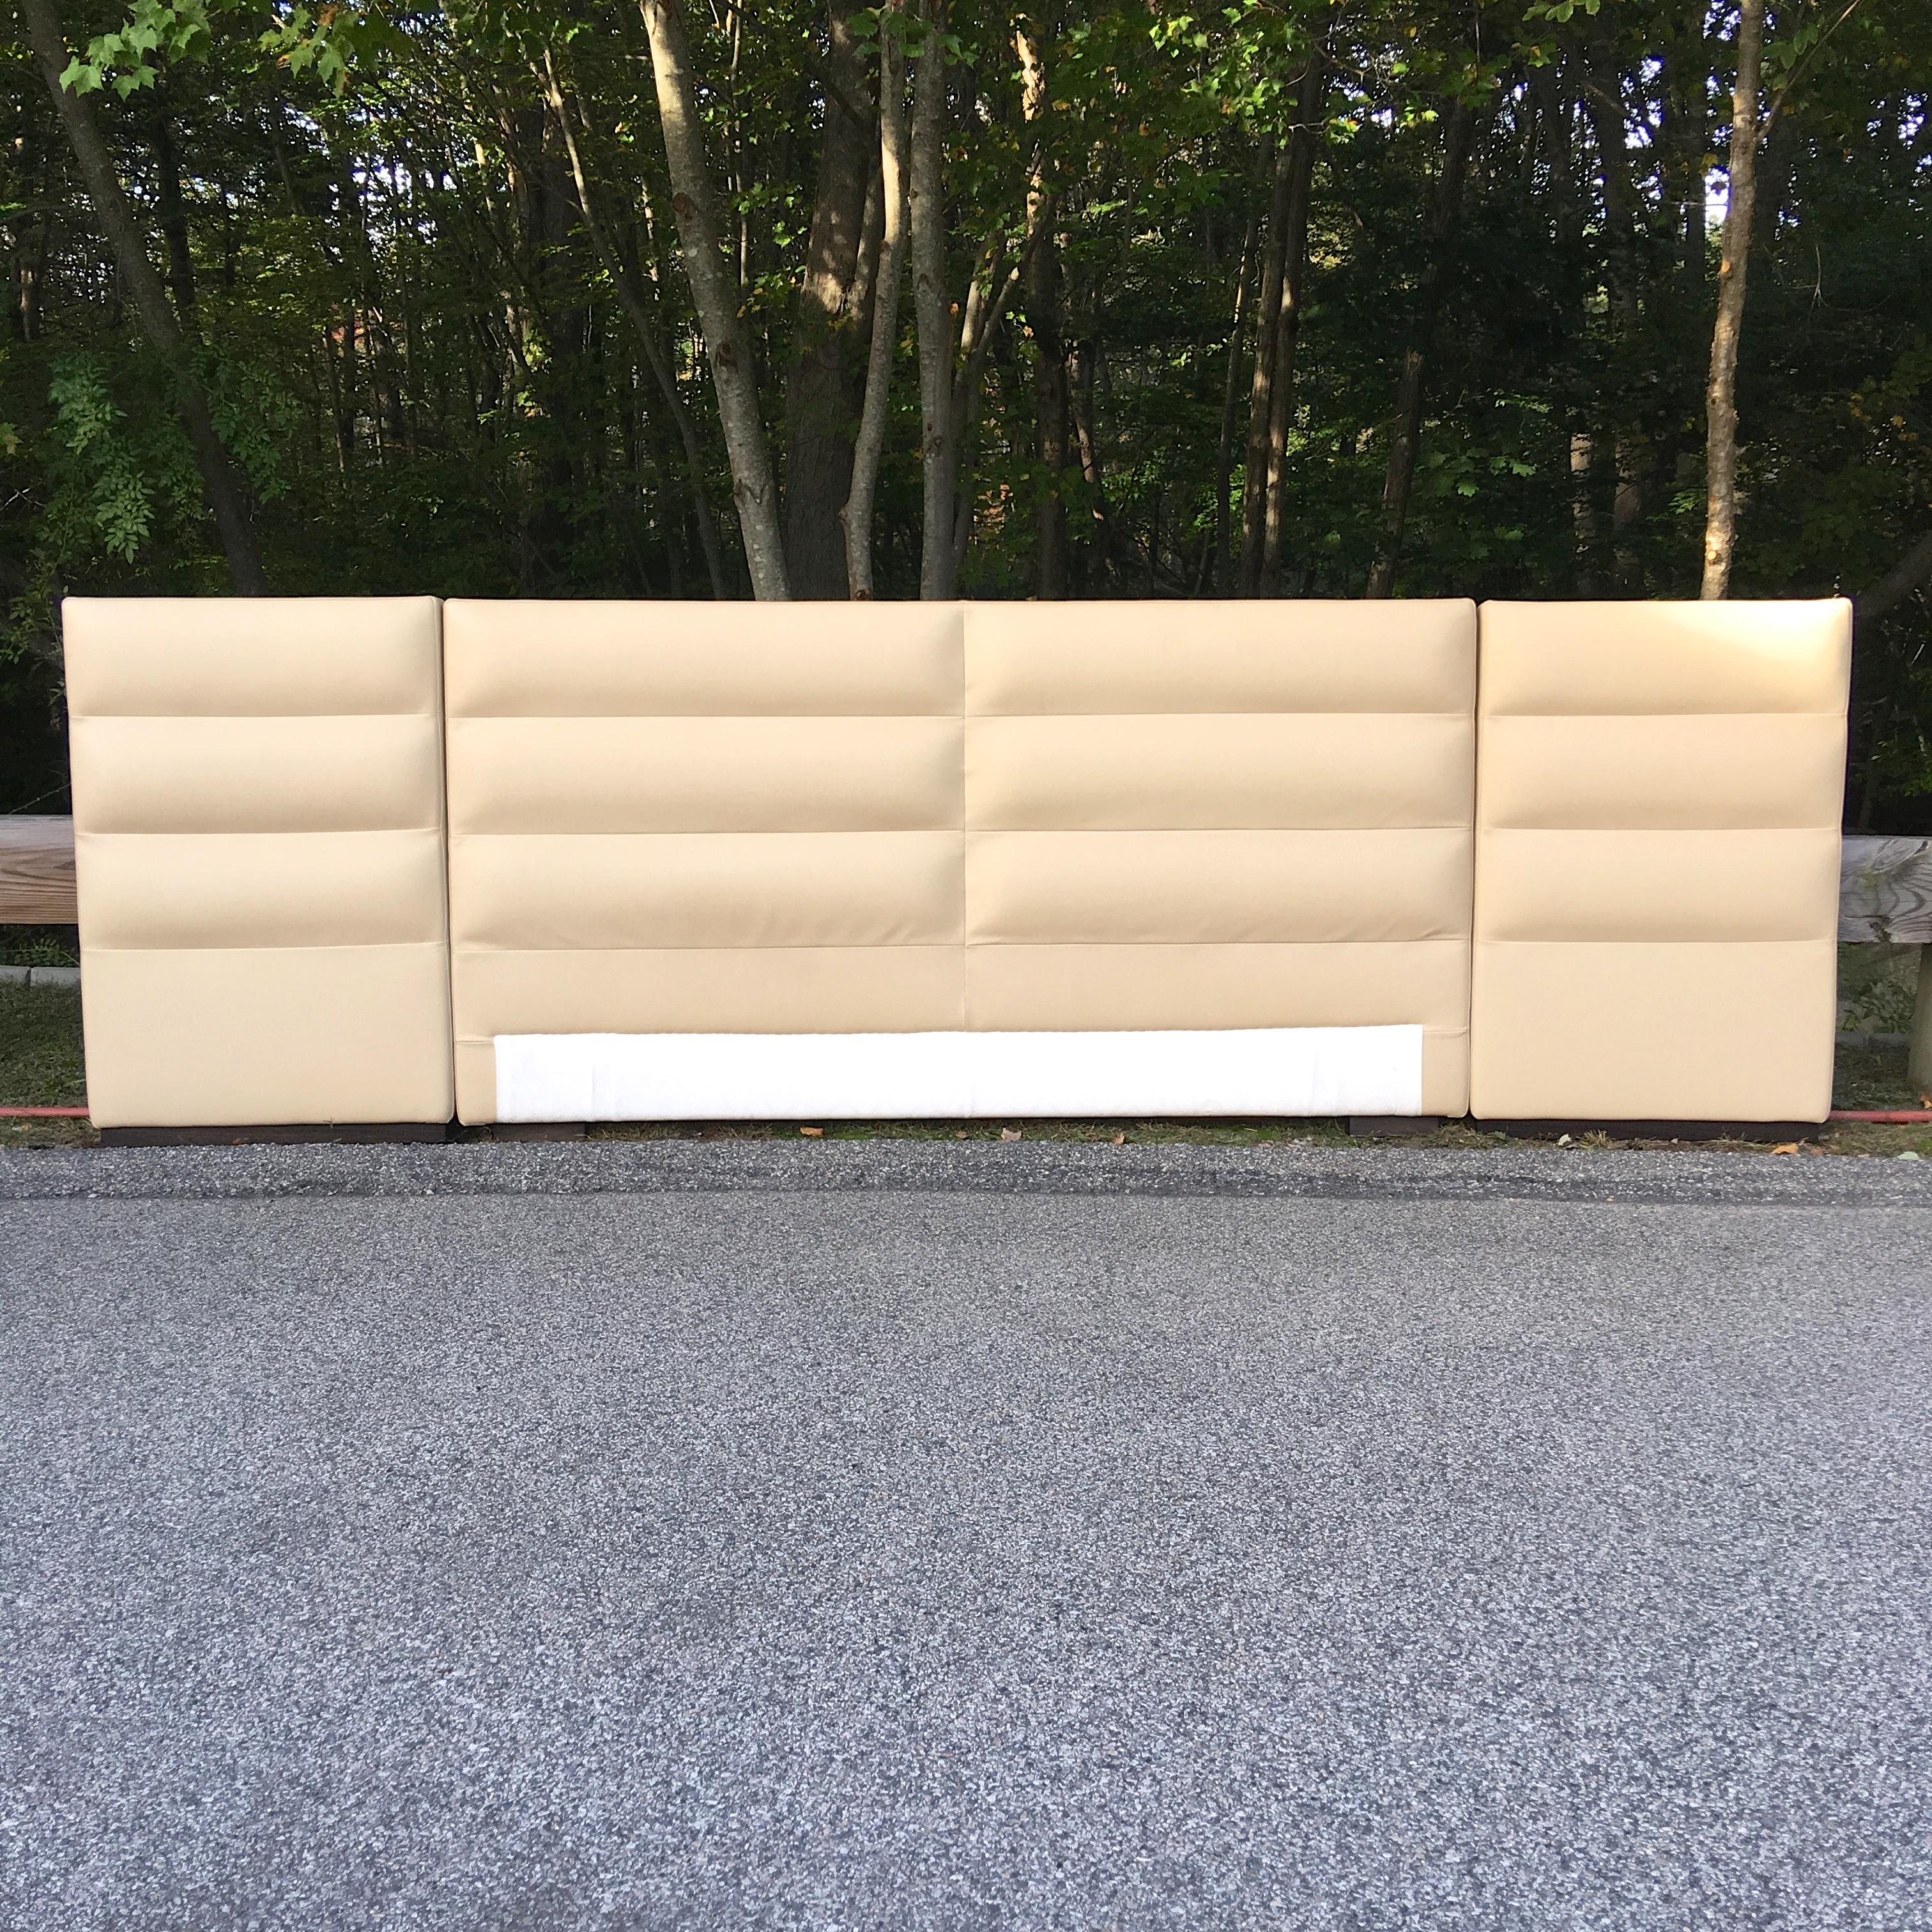 Opulent Fendi Casa light beige Italian leather channel tufted upholstered king-size headboard and integrated nightstands. Excellent condition.
Headboard is three upholstered leather sections, each on ebonized ash bases and have Fendi logo dust cover